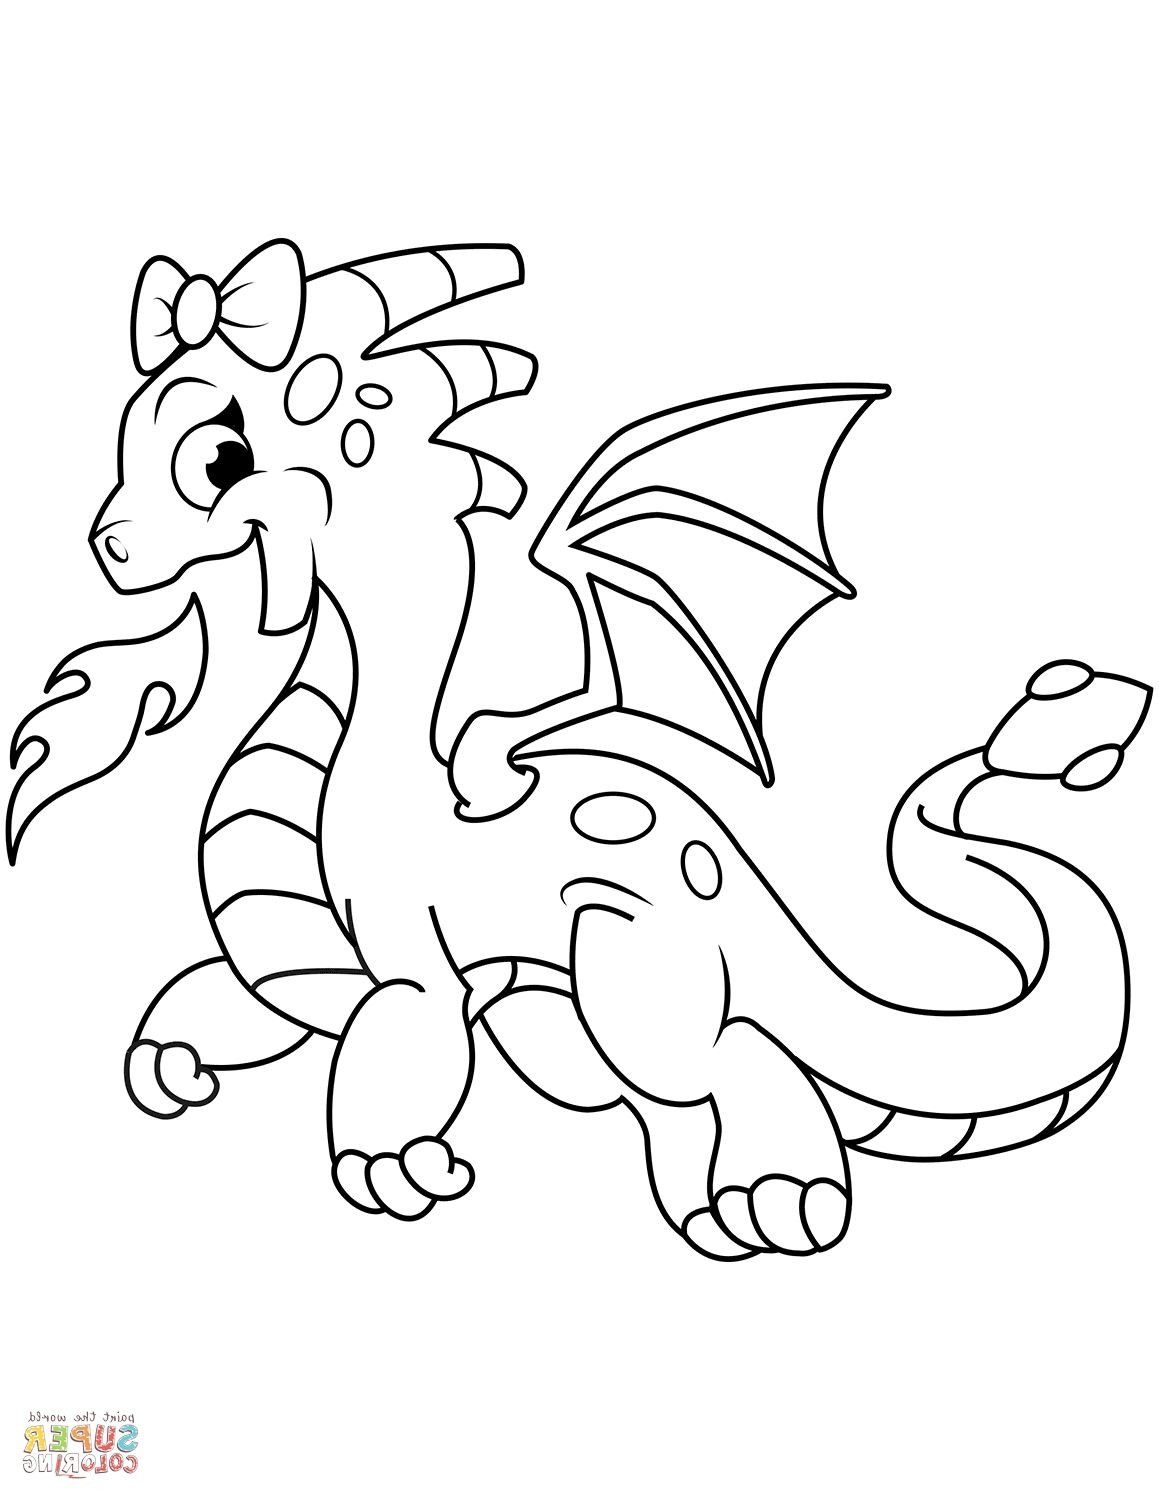 Dragon City Coloring Page - youngandtae.com | Dragon coloring page, Disney coloring  pages, Cartoon dragon